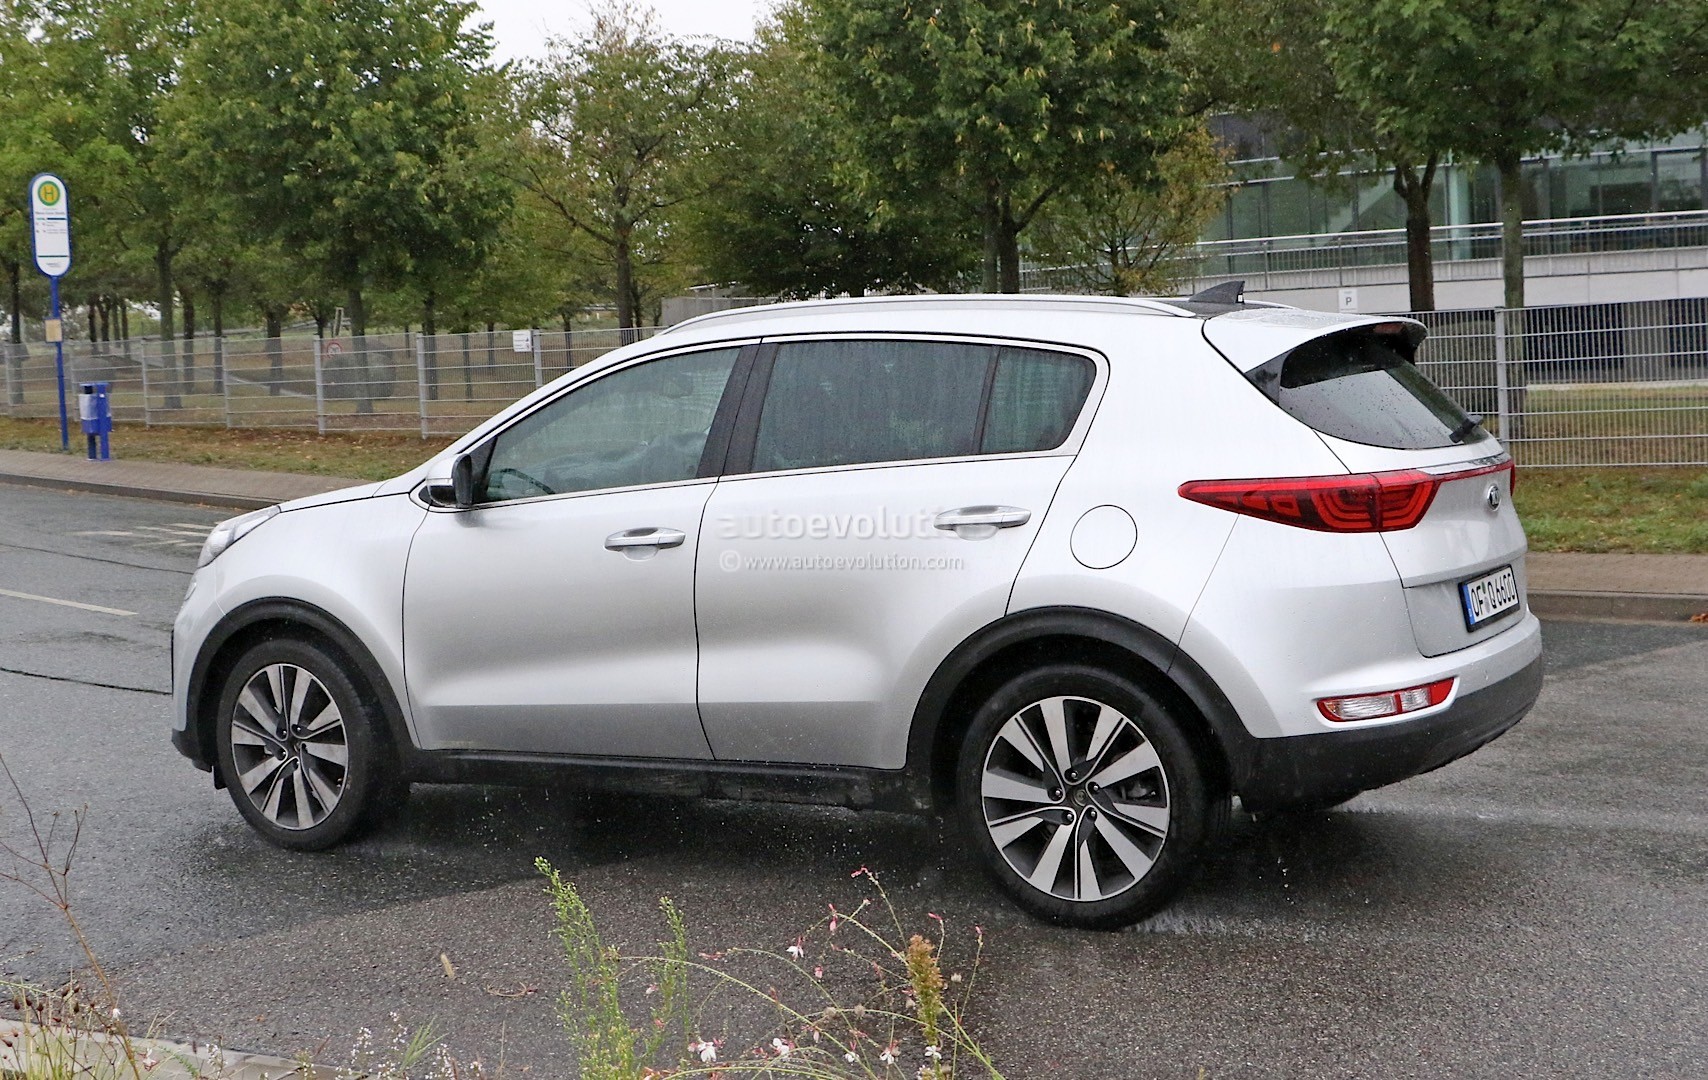 2016-kia-sportage-spotted-camouflage-free-looks-even-better-in-real-life-photo-gallery_5.jpg